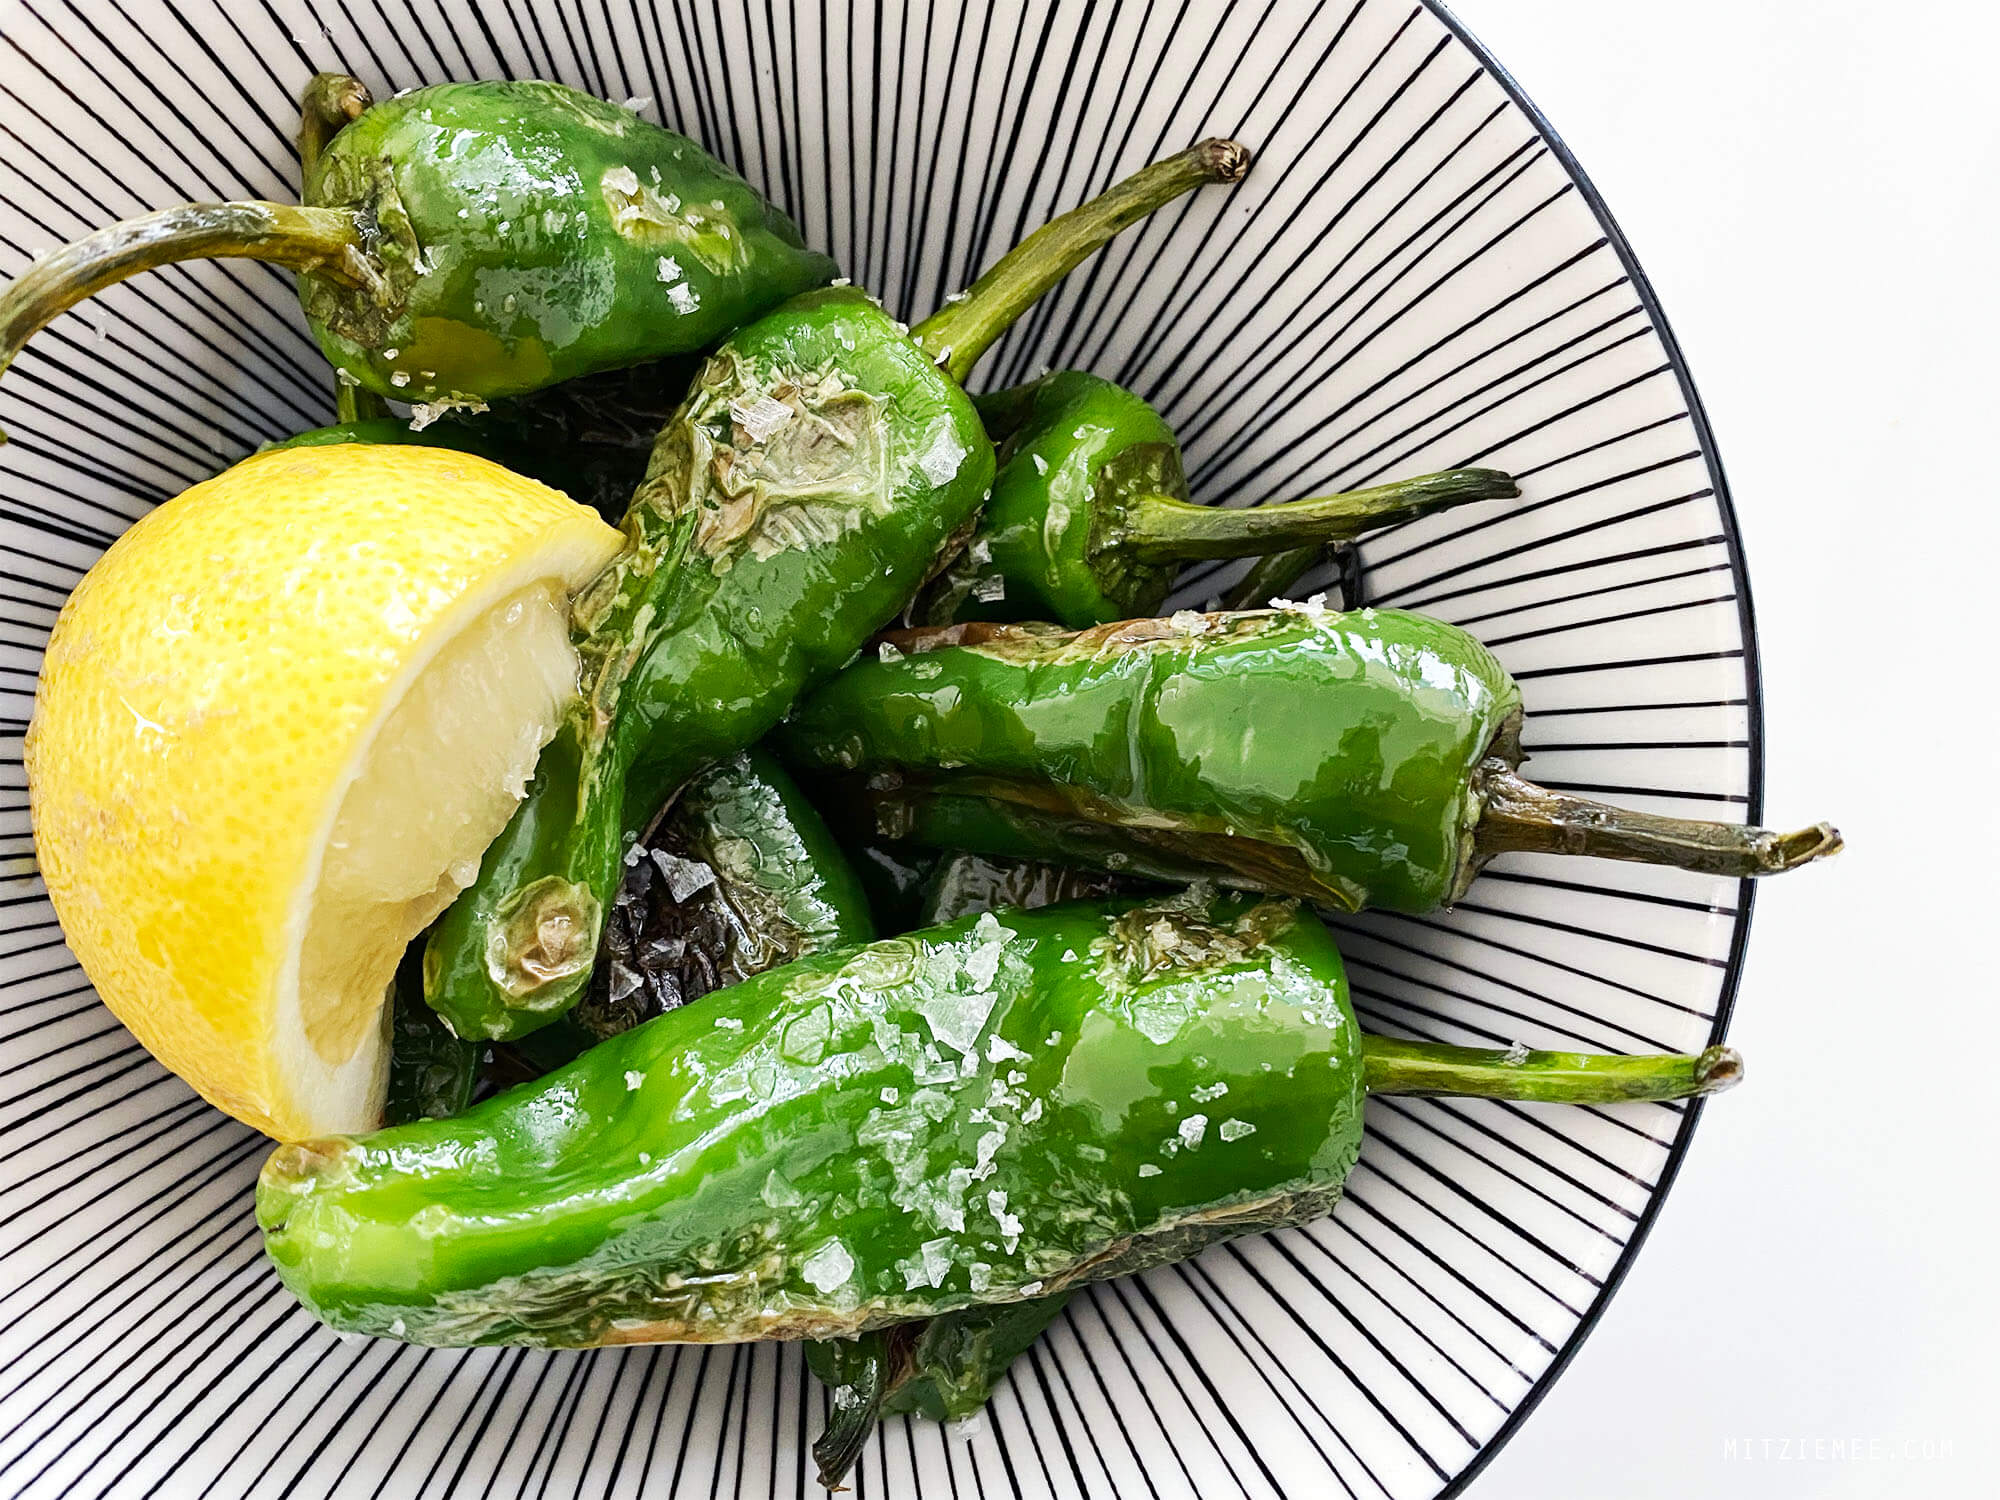 Pimientos de Padrón, blistered green peppers